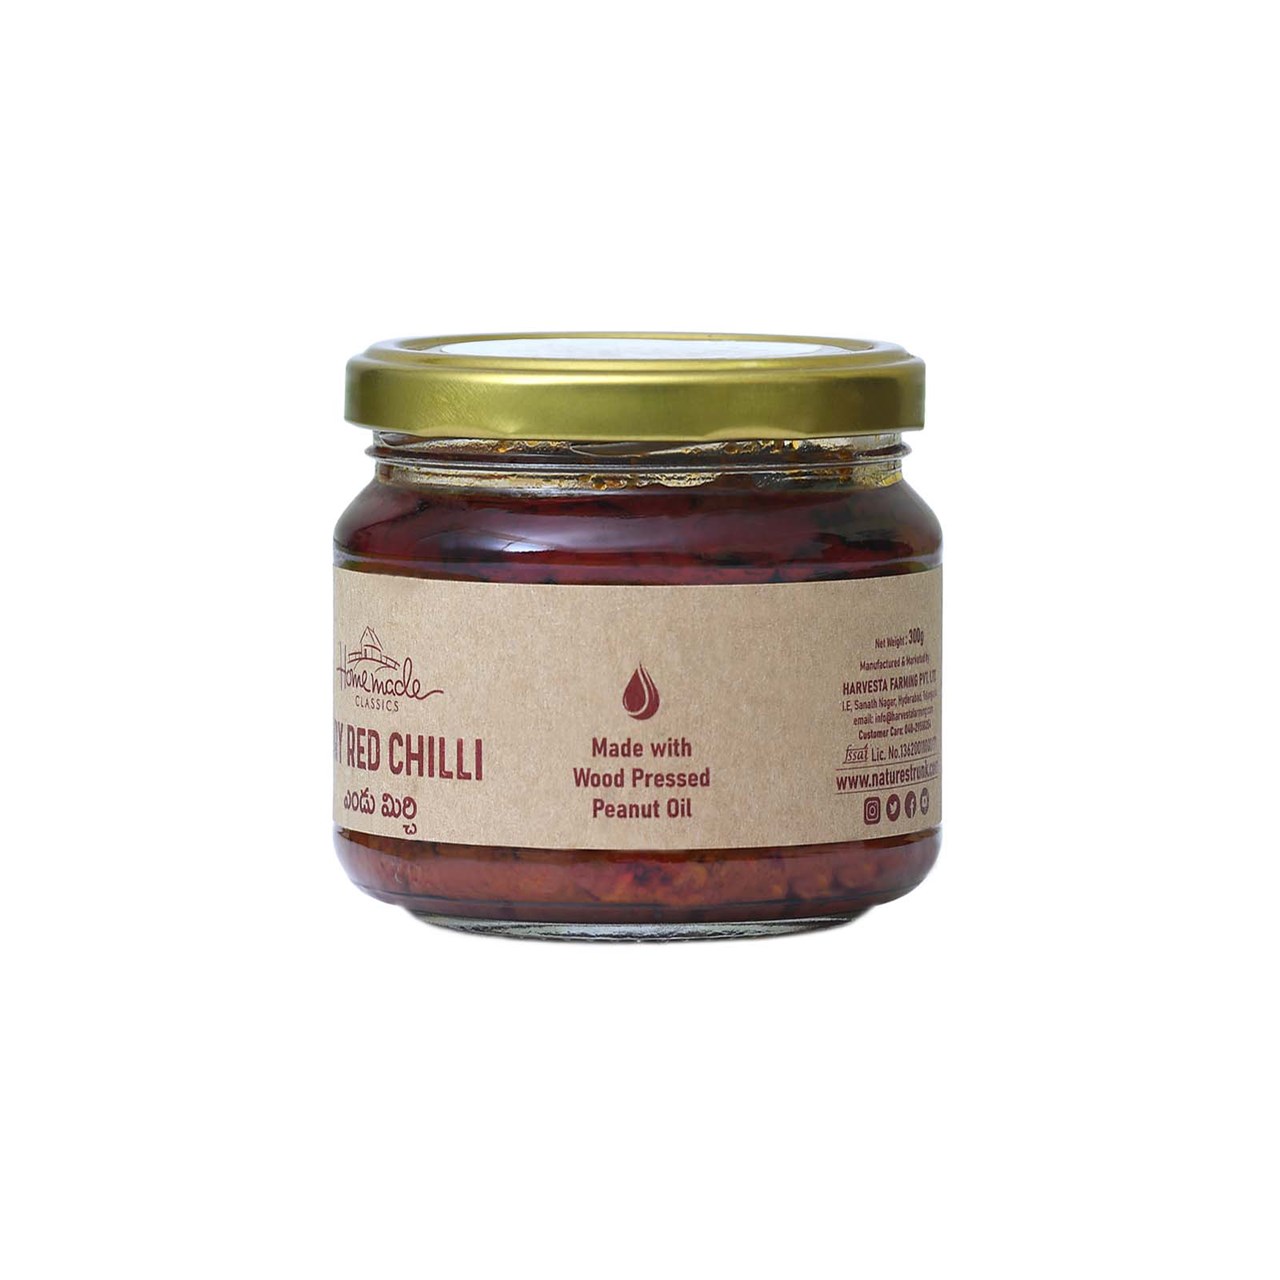 Picture of Dry Red Chilli Pickle 300 Grams